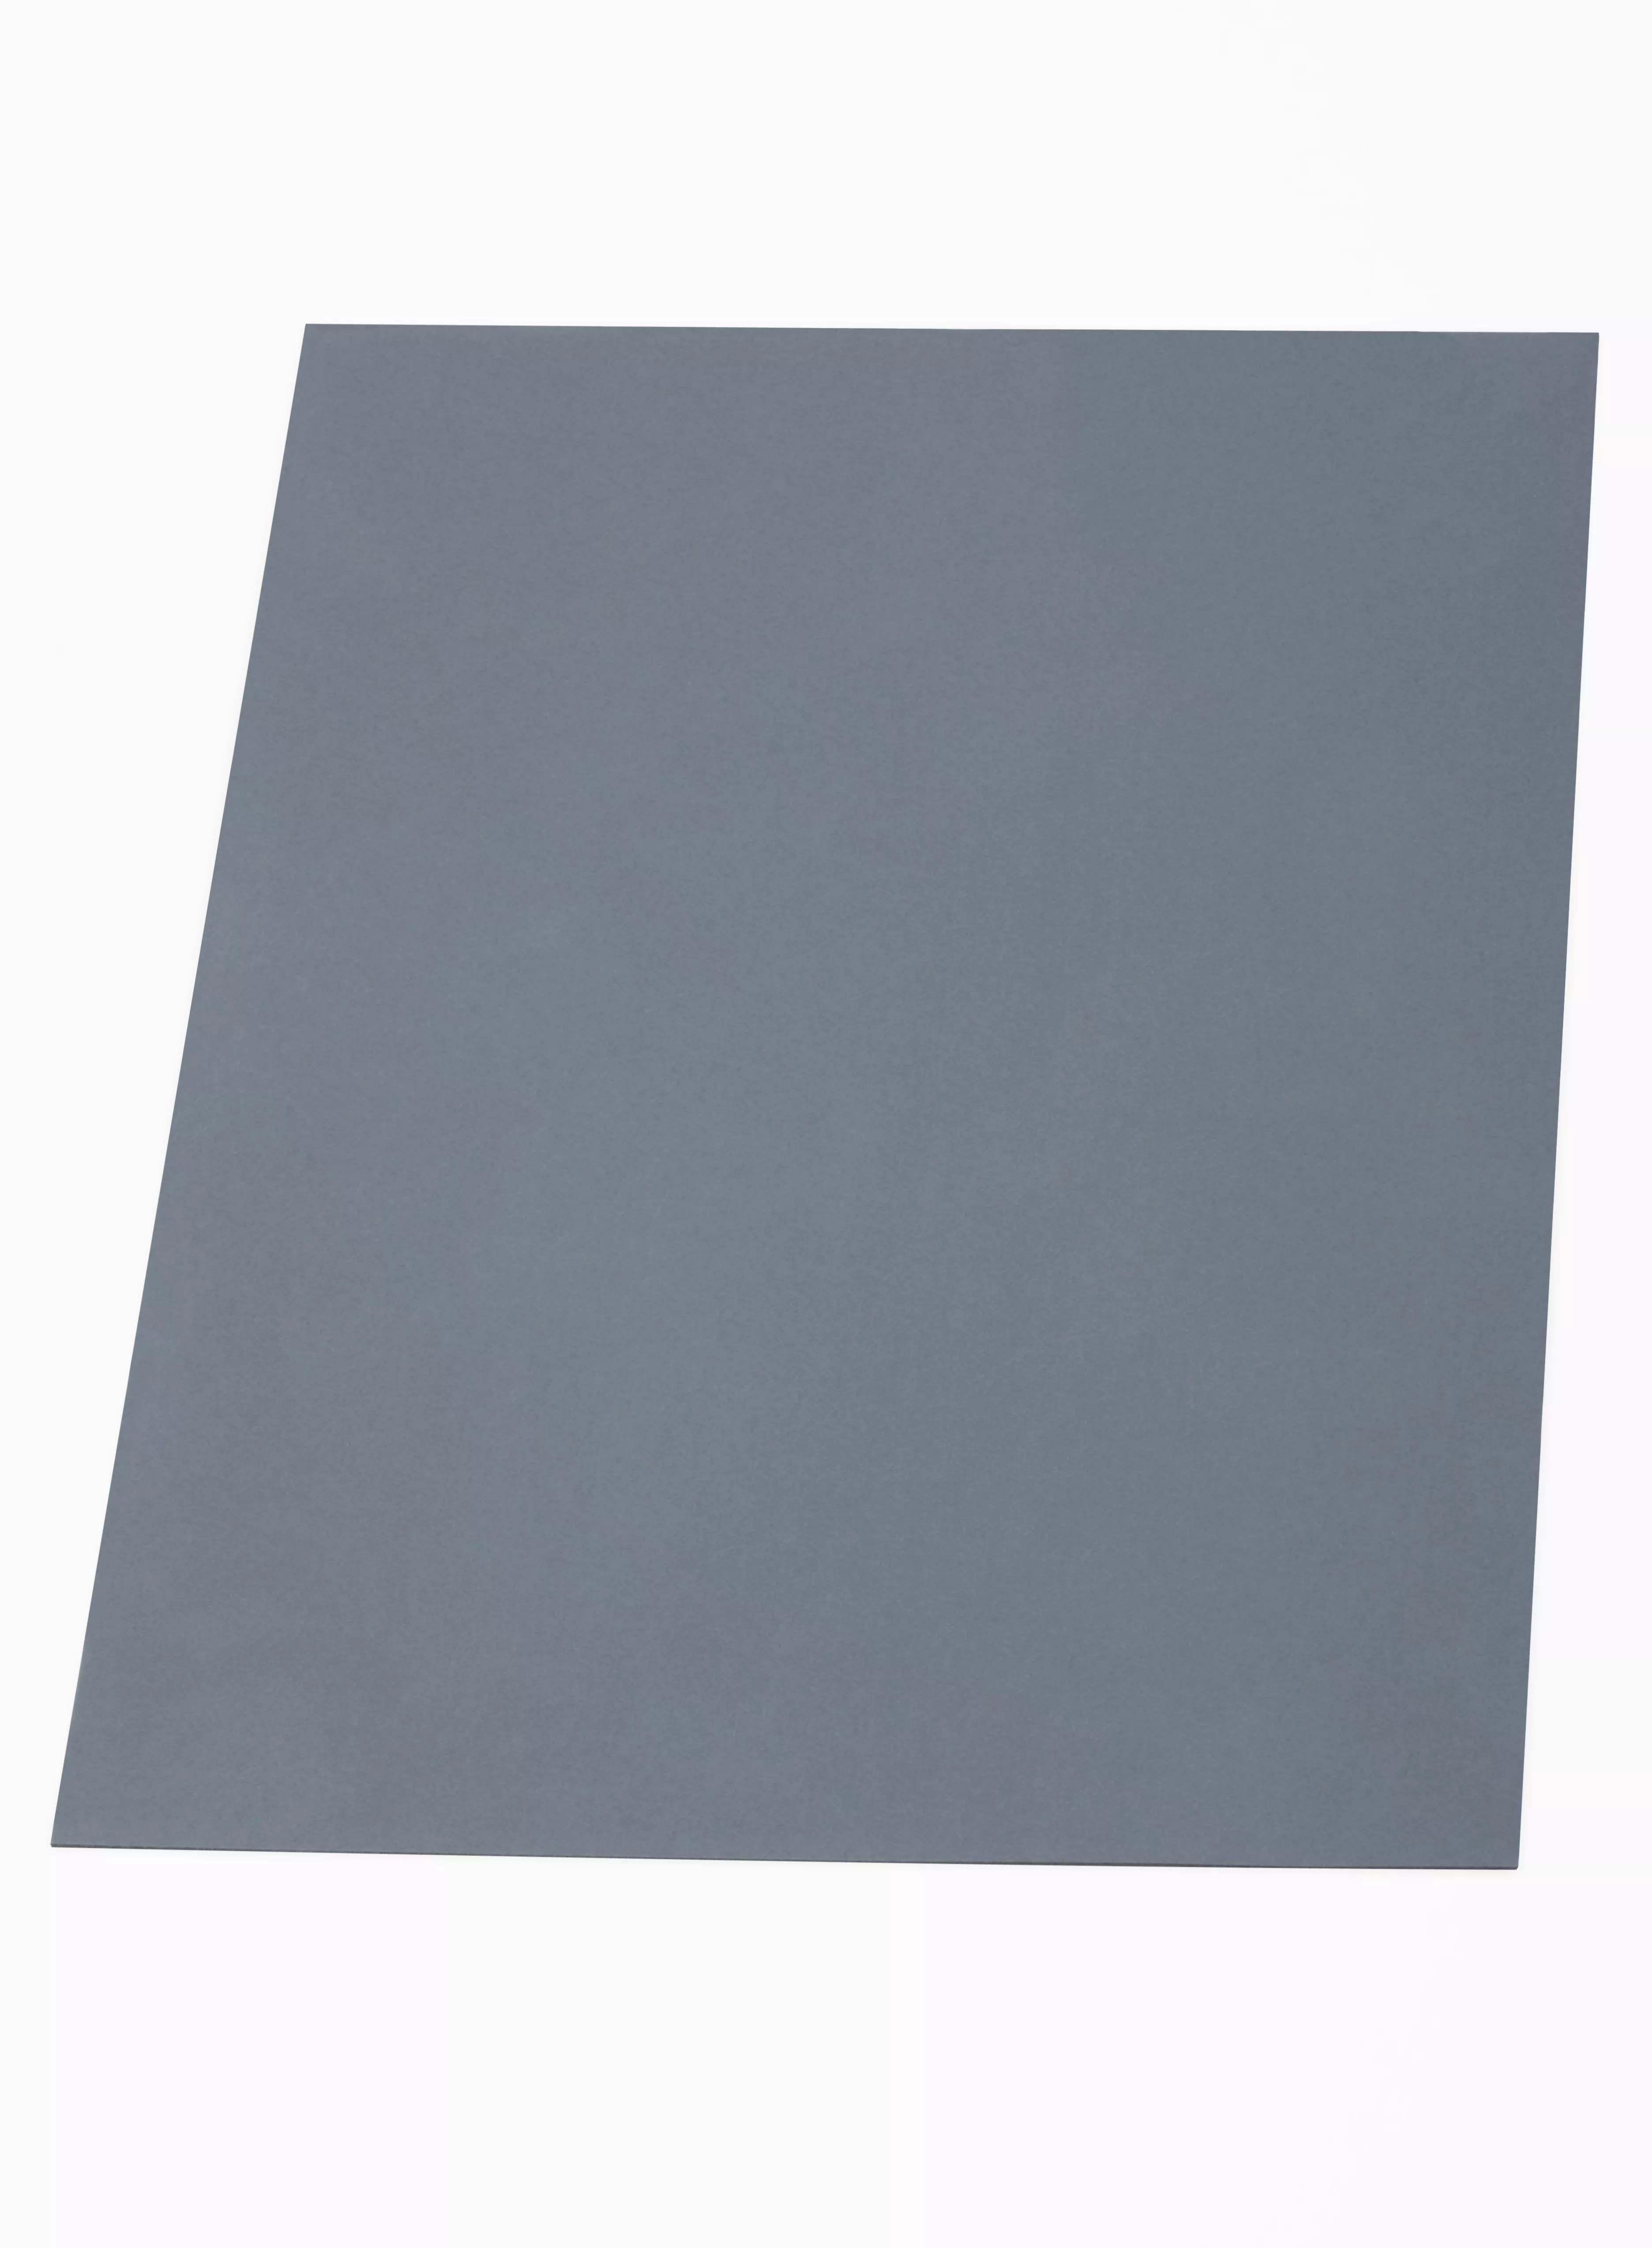 SKU 7010305068 | 3M™ Thermally Conductive Silicone Interface Pad 5549S